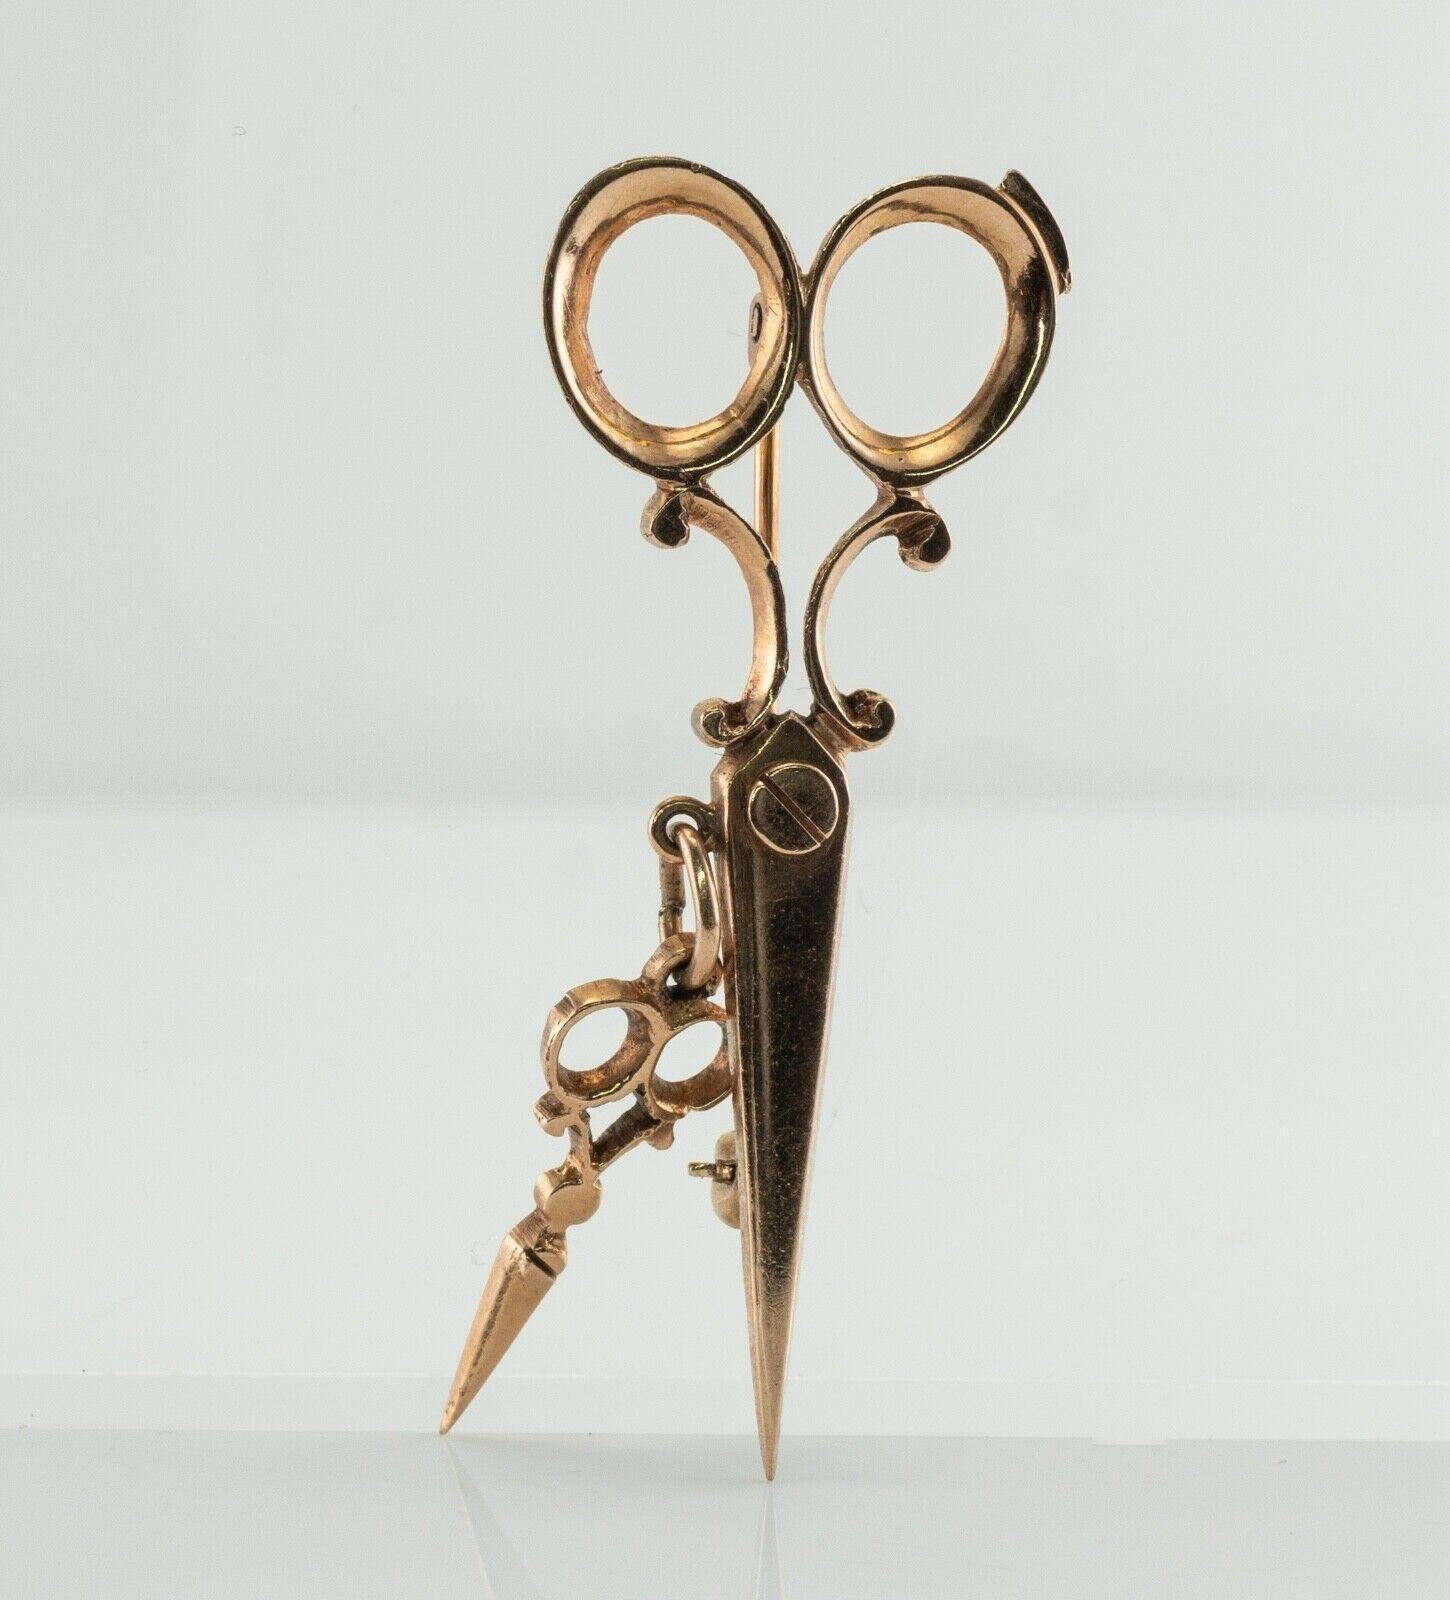 This vintage pin / brooch is made in solid 14K Rose Gold (carefully tested and guaranteed).
The large scissors measure 1-5/8